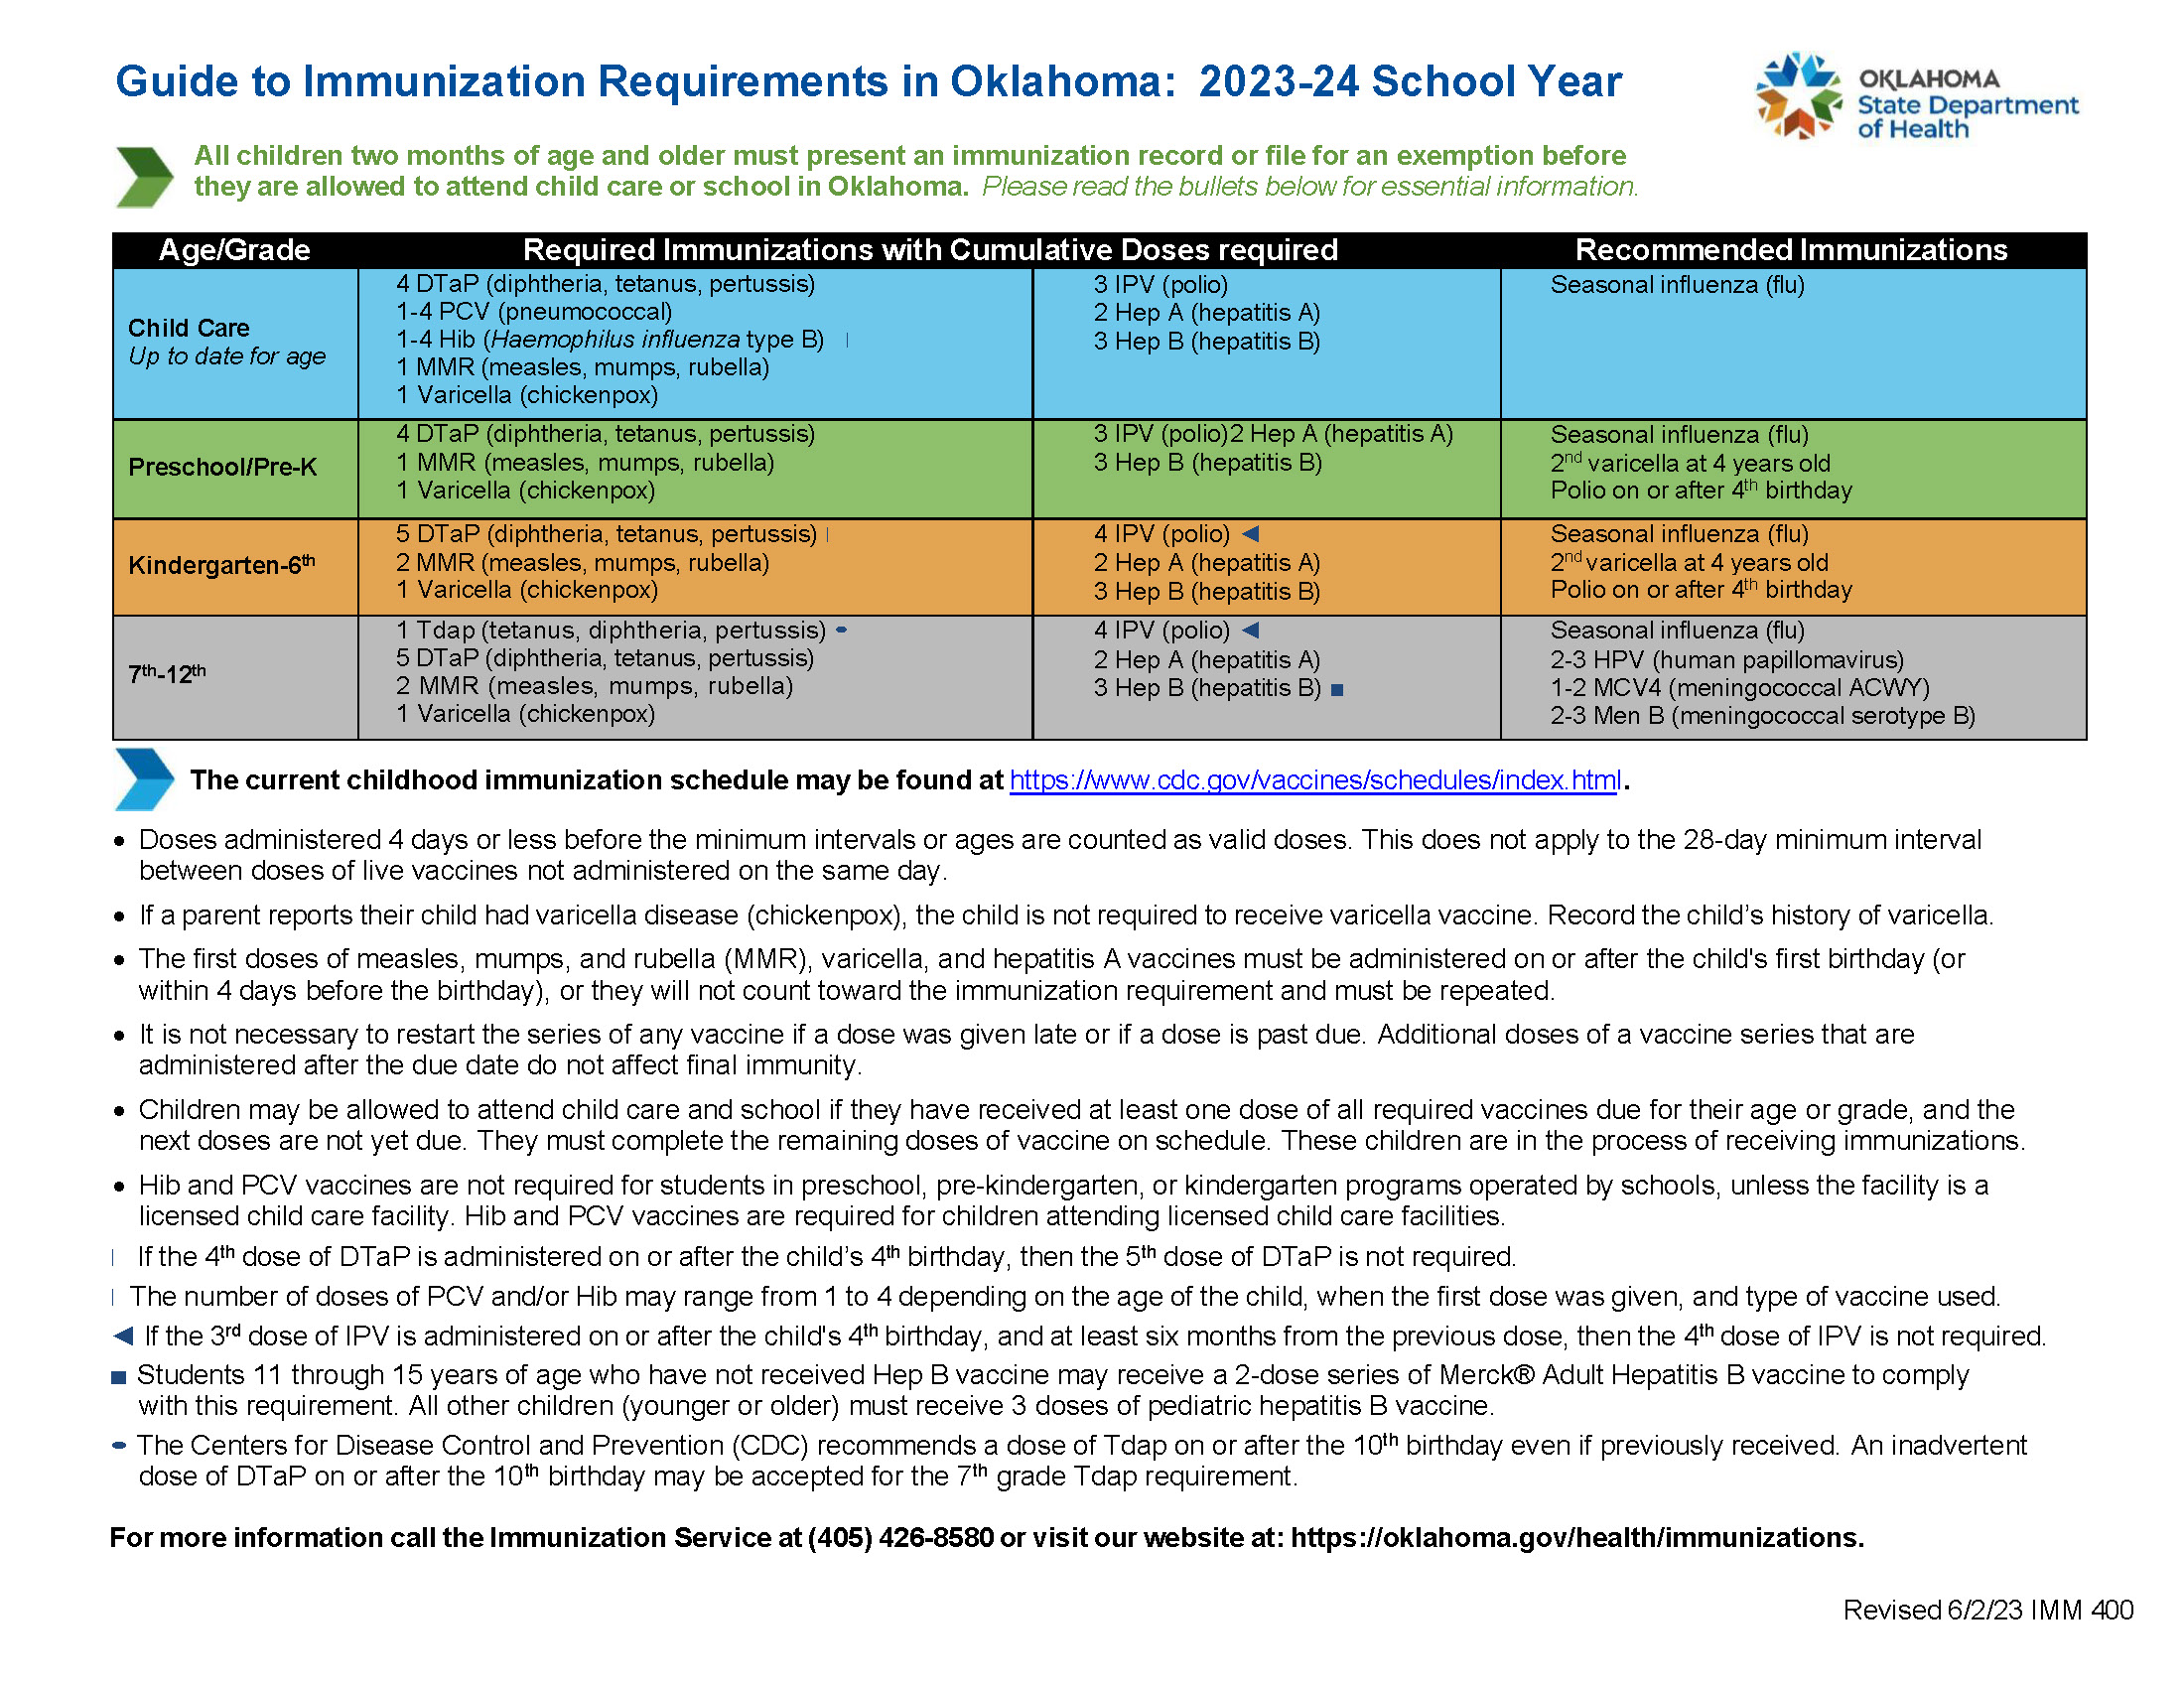 Guide to Immunization Requirements in Oklahoma: 2023-24 School Year All children two months of age and older must present an immunization record or file for an exemption before they are allowed to attend child care or school in Oklahoma. Please read the bullets below for essential information. Age/Grade Required Immunizations with Cumulative Doses required Recommended Immunizations Child Care Up to date for age 4 DTaP (diphtheria, tetanus, pertussis) 1-4 PCV (pneumococcal)1-4 Hib (Haemophilus influenza type B)1 MMR (measles, mumps, rubella)1 Varicella (chickenpox)3 IPV (polio) 2 Hep A (hepatitis A) 3 Hep B (hepatitis B) Seasonal influenza (flu) Preschool/Pre-K 4 DTaP (diphtheria, tetanus, pertussis) 1 MMR (measles, mumps, rubella) 1 Varicella (chickenpox) 3 IPV (polio)2 Hep A (hepatitis A) 3 Hep B (hepatitis B) Seasonal influenza (flu) 2nd varicella at 4 years old Polio on or after 4th birthday Kindergarten-6th 5 DTaP (diphtheria, tetanus, pertussis) 2 MMR (measles, mumps, rubella) 1 Varicella (chickenpox) 4 IPV (polio) ◄ 2 Hep A (hepatitis A) 3 Hep B (hepatitis B) Seasonal influenza (flu) 2nd varicella at 4 years old Polio on or after 4th birthday 7th-12th 1 Tdap (tetanus, diphtheria, pertussis) • 5 DTaP (diphtheria, tetanus, pertussis) 2 MMR (measles, mumps, rubella) 1 Varicella (chickenpox) 4 IPV (polio) ◄ 2 Hep A (hepatitis A) 3 Hep B (hepatitis B) ■ Seasonal influenza (flu) 2-3 HPV (human papillomavirus)1-2 MCV4 (meningococcal ACWY)2-3 Men B (meningococcal serotype B) The current childhood immunization schedulemay be found at https://www.cdc.gov/vaccines/schedules/index.html. •Doses administered 4 days or less before the minimum intervals or ages are counted as valid doses. This does not apply to the 28-day minimum intervalbetween doses of live vaccines not administered on the same day. •If a parent reports their child had varicella disease (chickenpox), the child is not required to receive varicella vaccine. Record the child’s history of varicella. •The first doses of measles, mumps, and rubella (MMR), varicella, and hepatitis A vaccines must be administered on or after the child's first birthday (orwithin 4 days before the birthday), or they will not count toward the immunization requirement and must be repeated. •It is not necessary to restart the series of any vaccine if a dose was given late or if a dose is past due. Additional doses of a vaccine series that areadministered after the due date do not affect final immunity. •Children may be allowed to attend child care and school if they have received at least one dose of all required vaccines due for their age or grade, and thenext doses are not yet due. They must complete the remaining doses of vaccine on schedule. These children are in the process of receiving immunizations. •Hib and PCV vaccines are not required for students in preschool, pre-kindergarten, or kindergarten programs operated by schools, unless the facility is alicensed child care facility. Hib and PCV vaccines are required for children attending licensed child care facilities.If the 4th dose of DTaP is administered on or after the child’s 4th birthday, then the 5th dose of DTaP is not required.The number of doses of PCV and/or Hib may range from 1 to 4 depending on the age of the child, when the first dose was given, and type of vaccine used. ◄If the 3rd dose of IPV is administered on or after the child's 4th birthday, and at least six months from the previous dose, then the 4th dose of IPV is not required. ■Students 11 through 15 years of age who have not received Hep B vaccine may receive a 2-dose series of Merck® Adult Hepatitis B vaccine to complywith this requirement. All other children (younger or older) must receive 3 doses of pediatric hepatitis B vaccine. • The Centers for Disease Control and Prevention (CDC) recommends a dose of Tdap on or after the 10th birthday even if previously received. An inadvertentdose of DTaP on or after the 10th birthday may be accepted for the 7th grade Tdap requirement.For more information call the Immunization Service at (405) 426-8580 or visit our website at: https://oklahoma.gov/health/immunizations. Revised 6/2/23 IMM 400